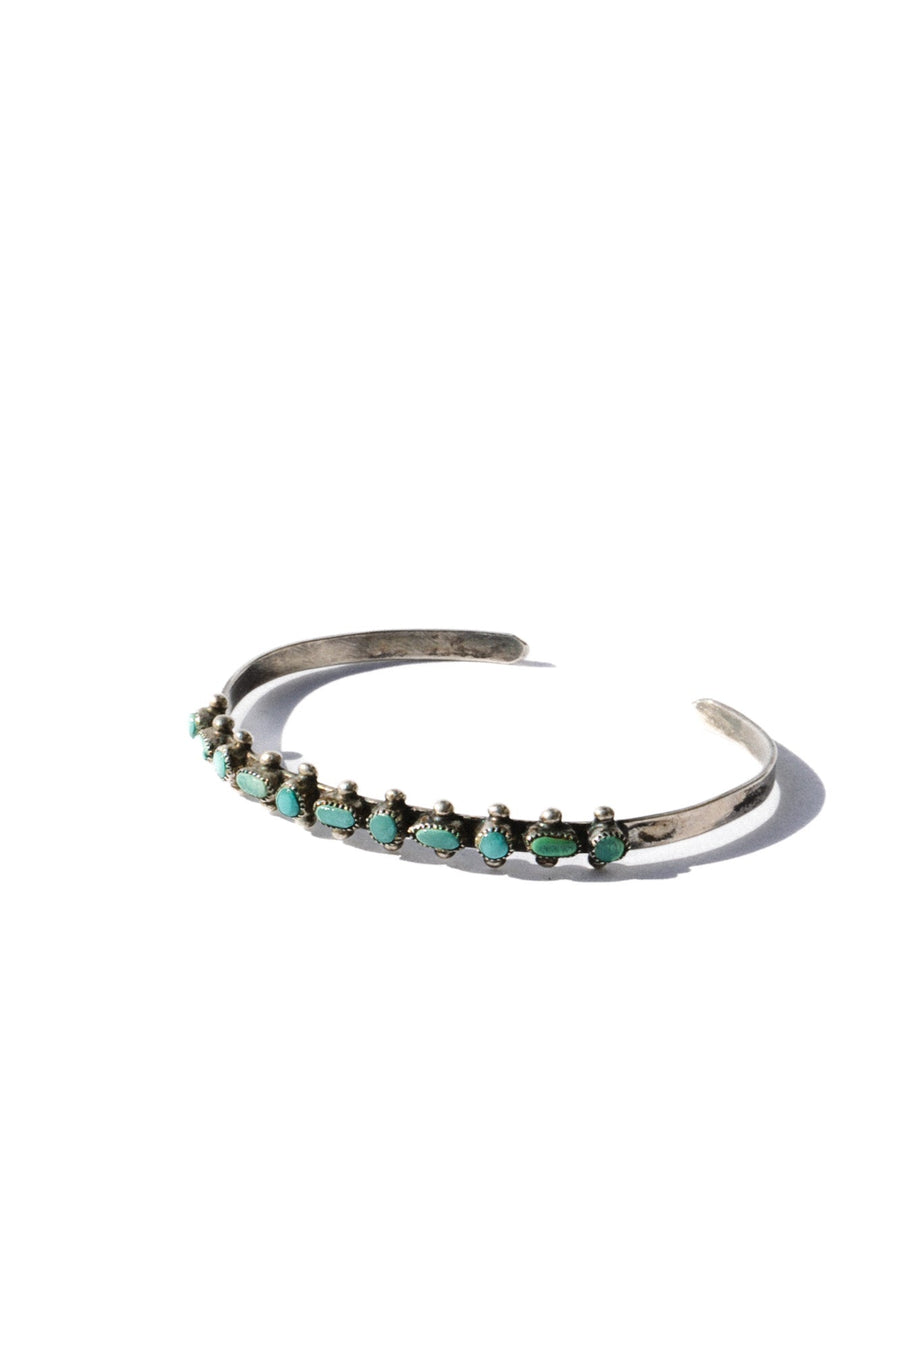 Ayman Jewelry Silver Amitola Vintage Turquoise Cuff